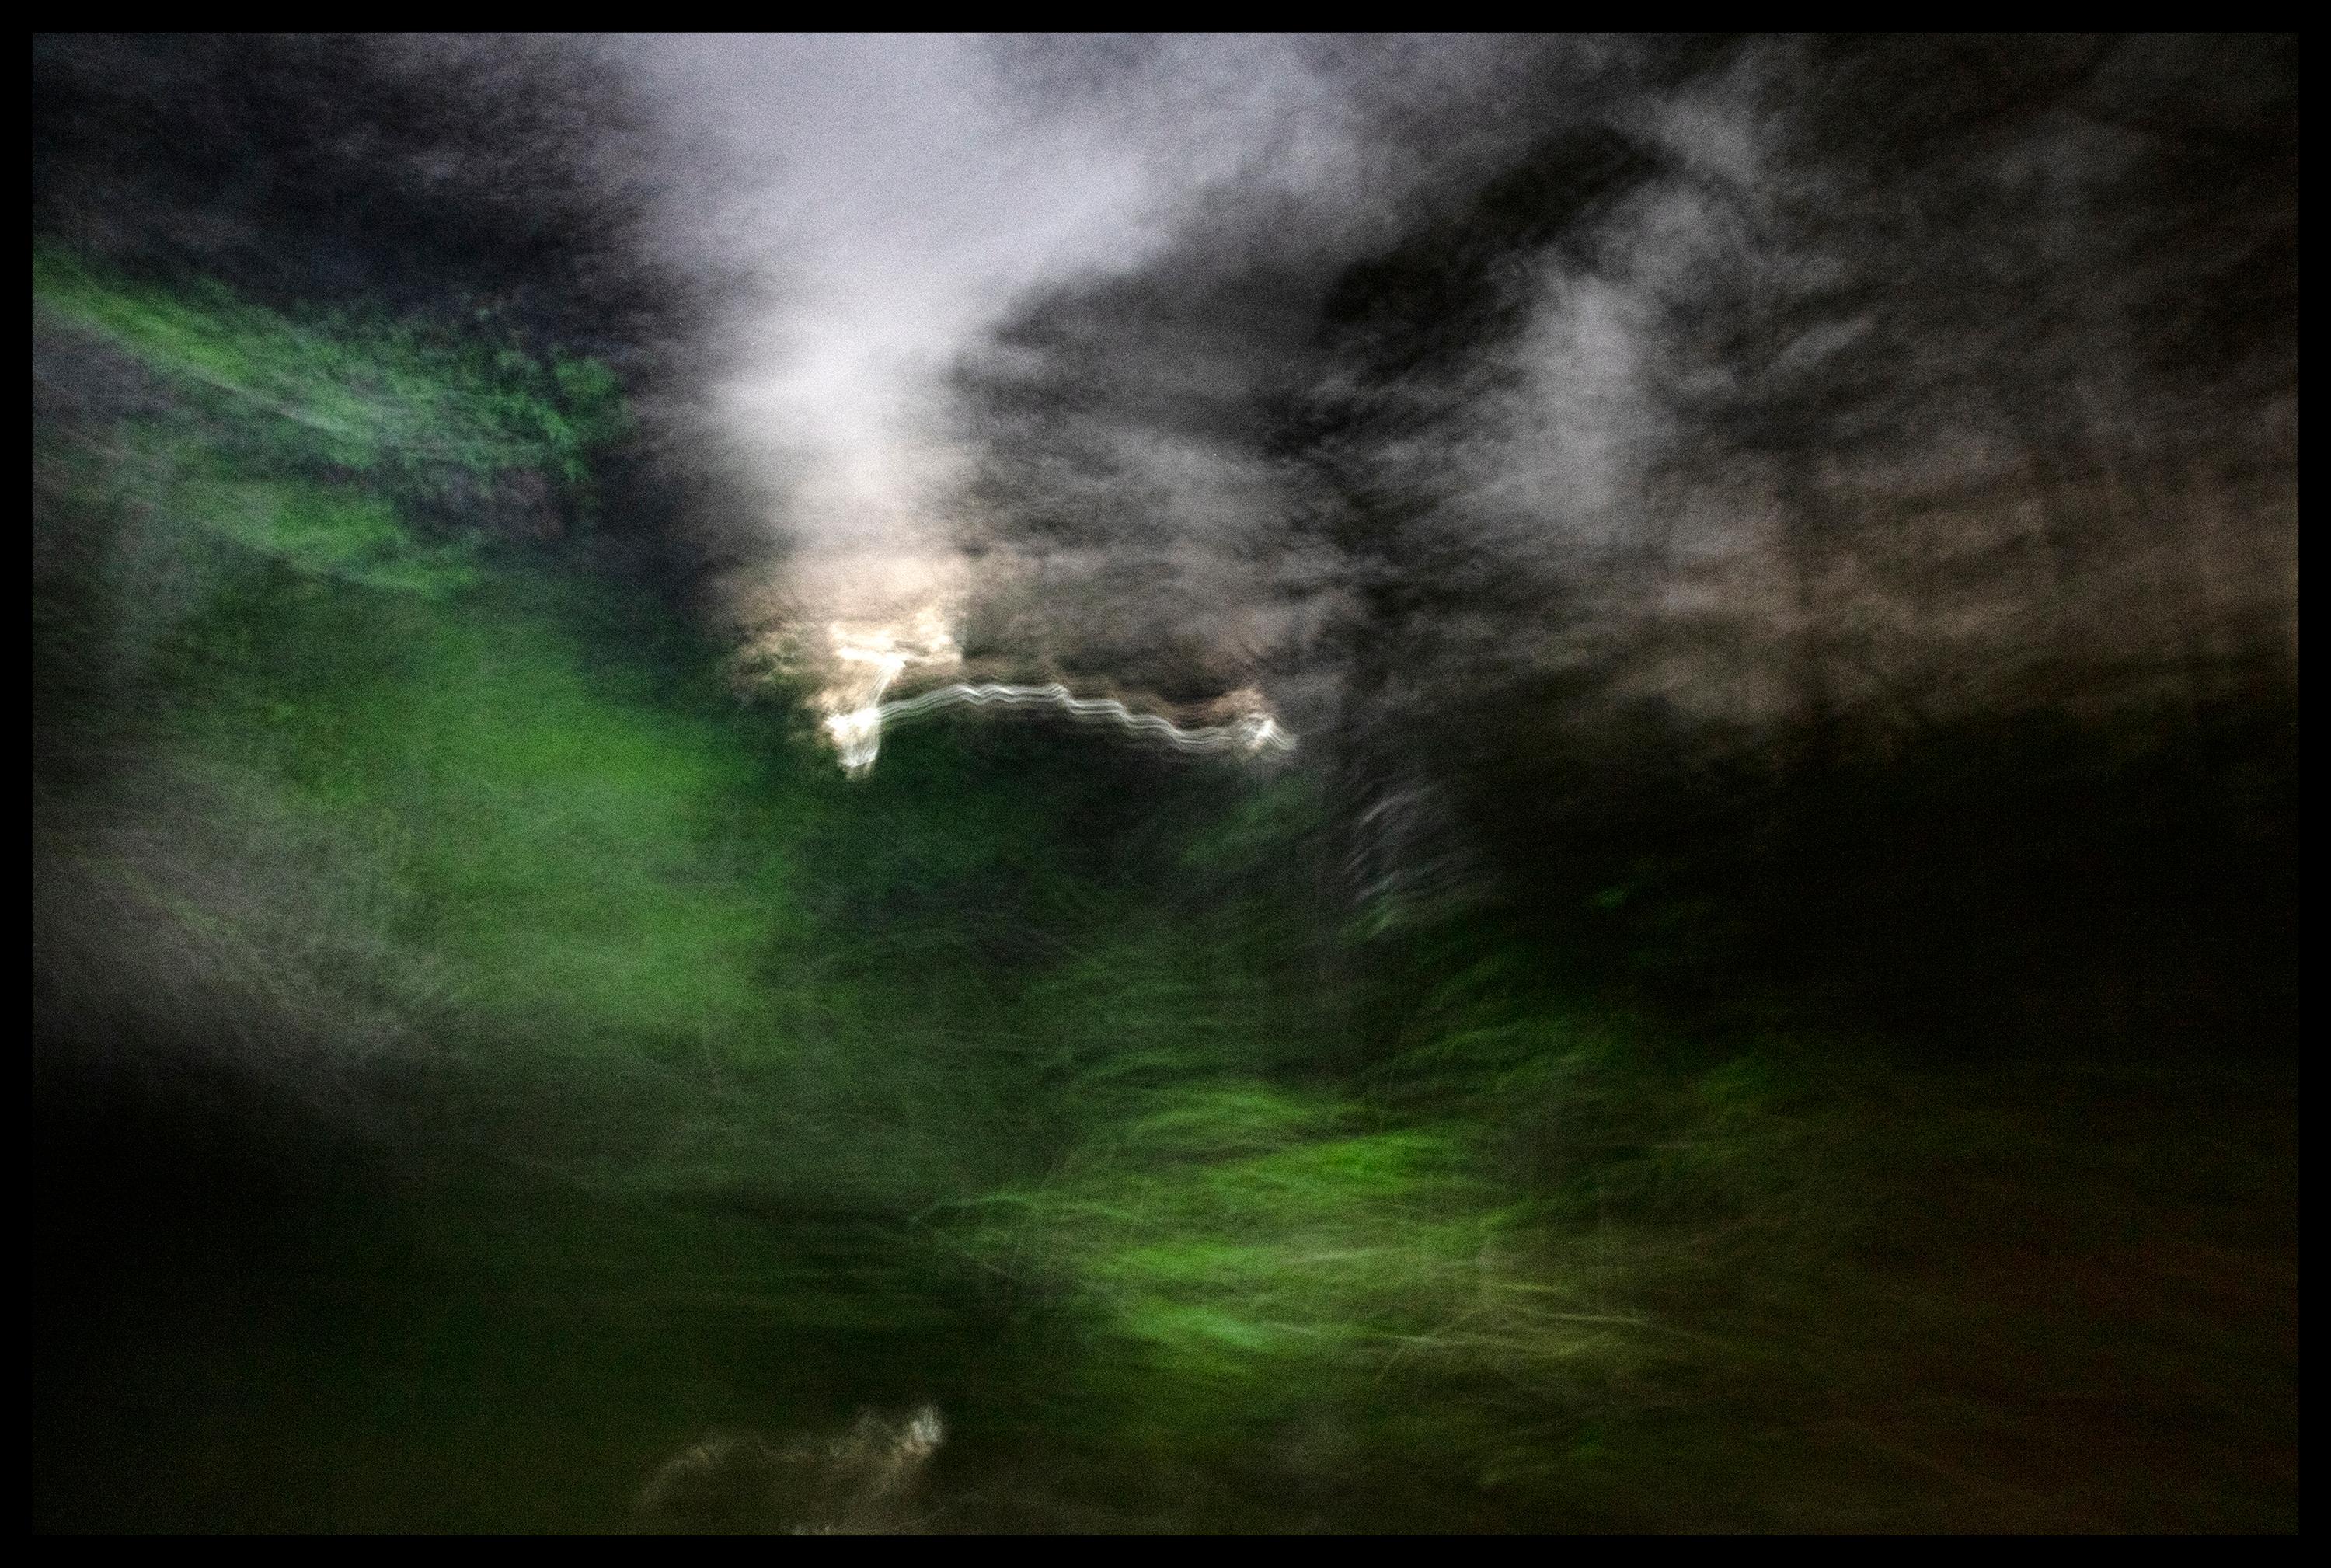 Emancipation On the Full Moon No. 2 - swamp - water - southern photography - Photograph by Cecilia Montalvo & Charlie McCullers